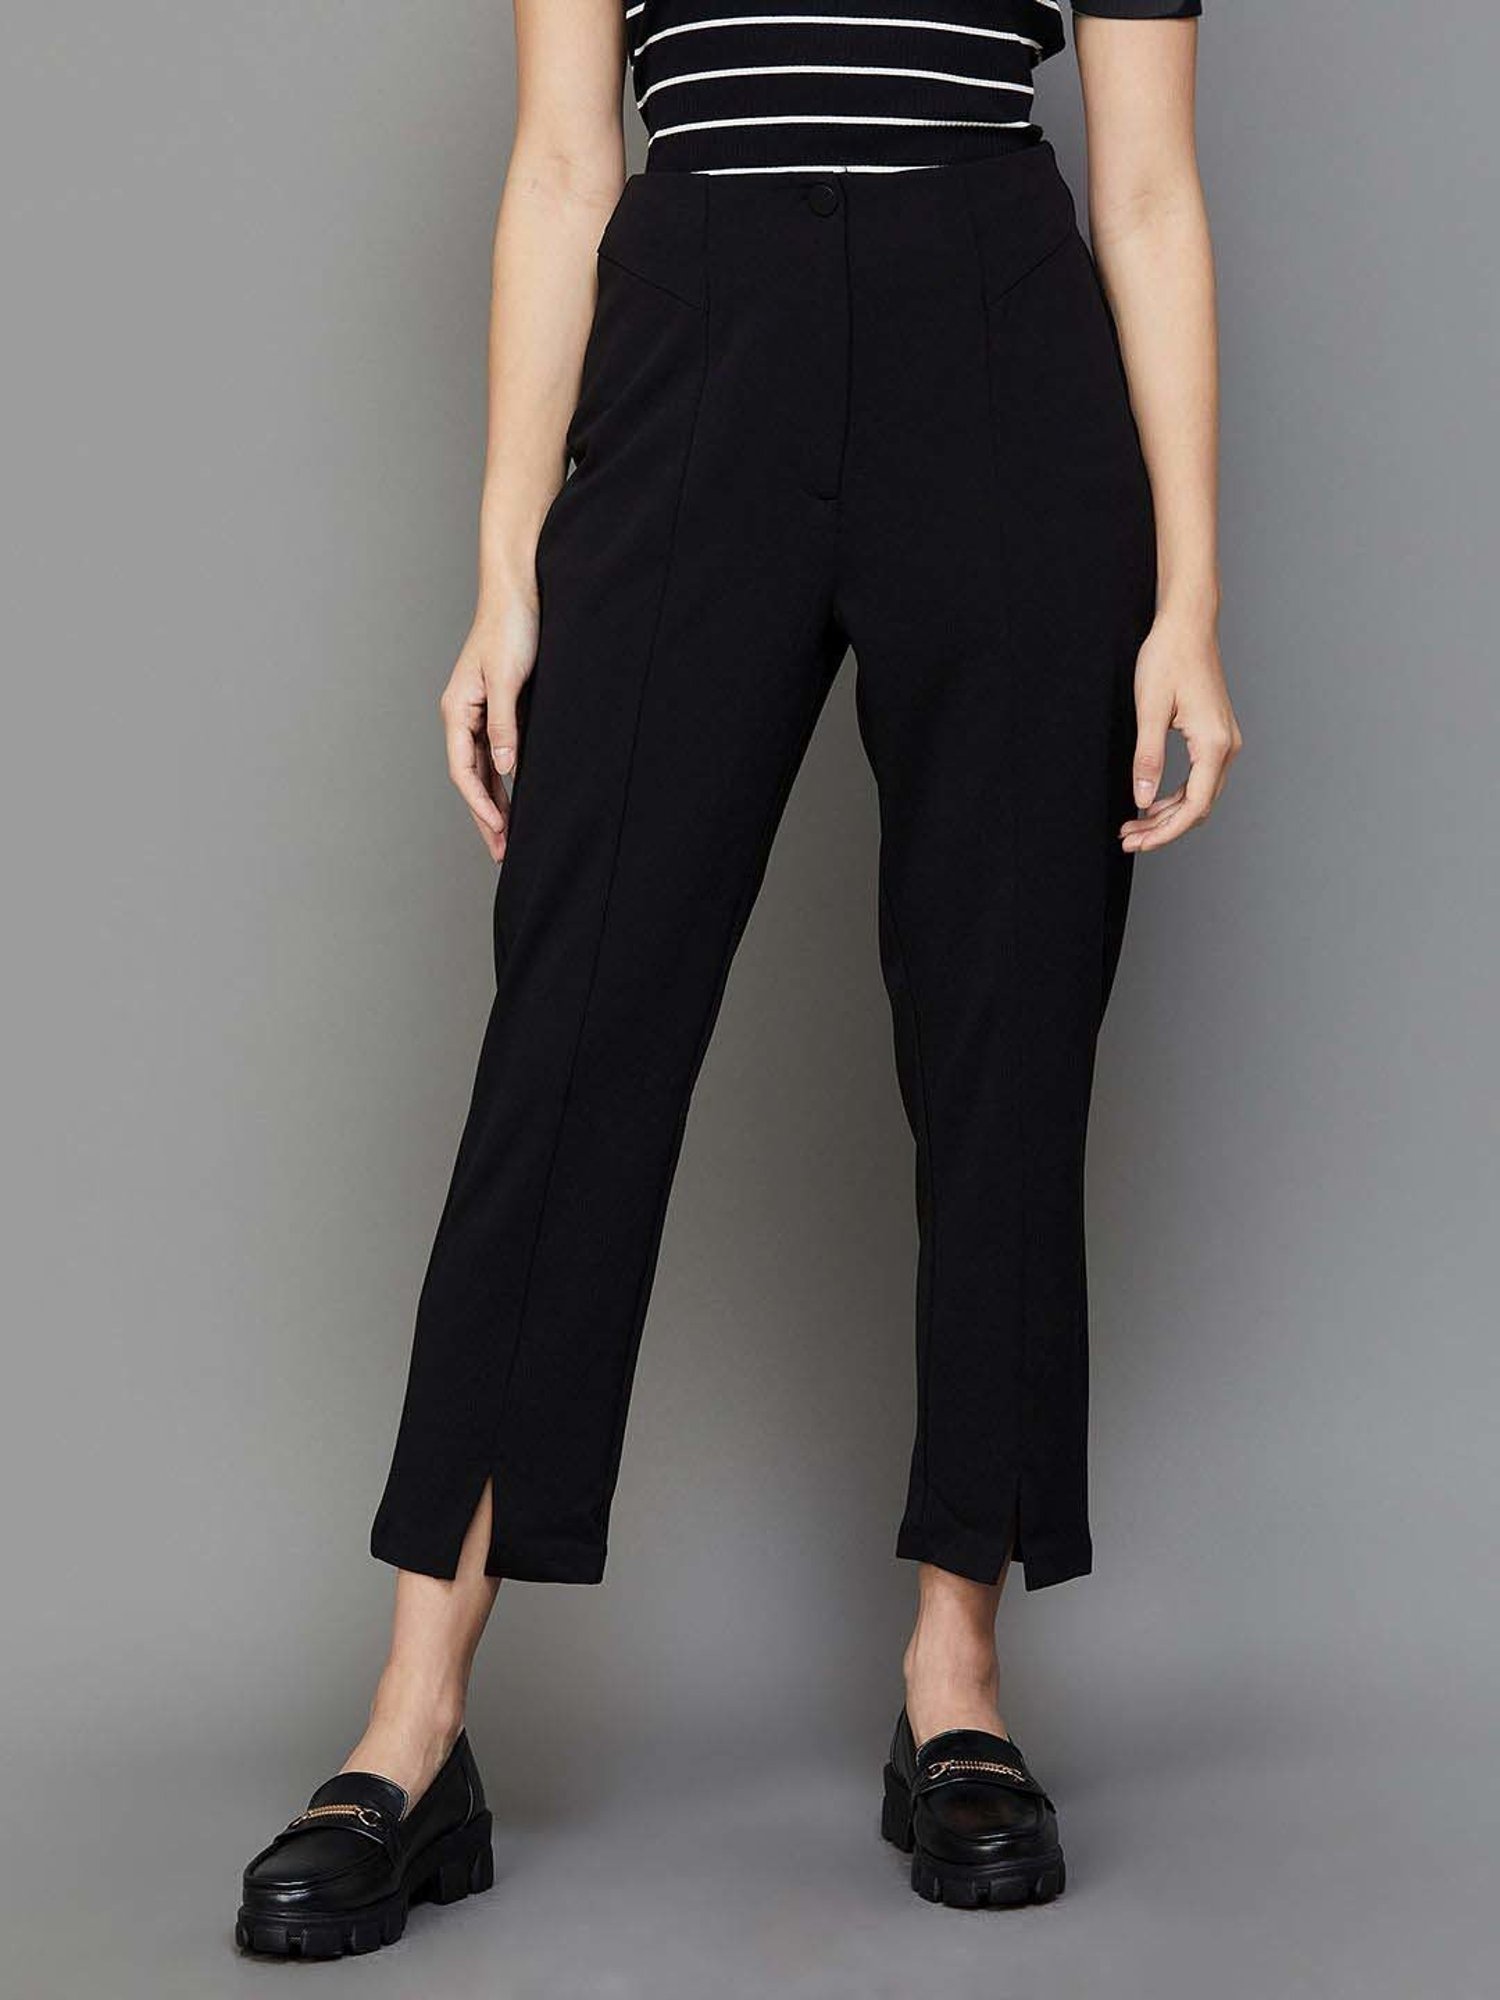 Spanx's Oprah-Loved Perfect Black Pants Are the Best Black Trousers